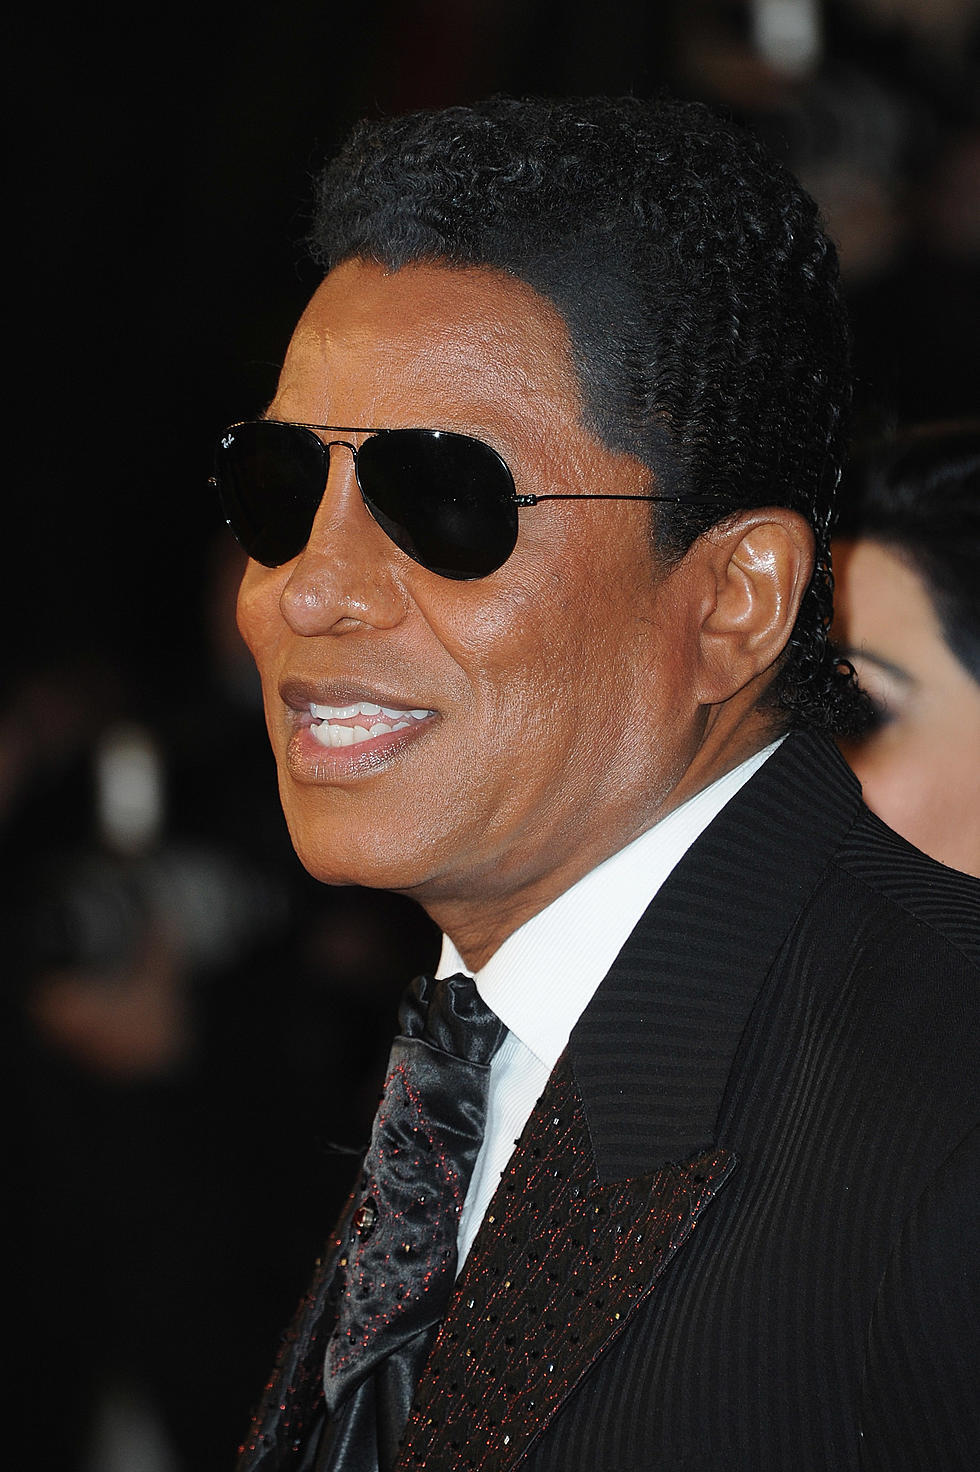 Jermaine Jackson Is Preparing Us For A Personal Reflection On Michaels Life.